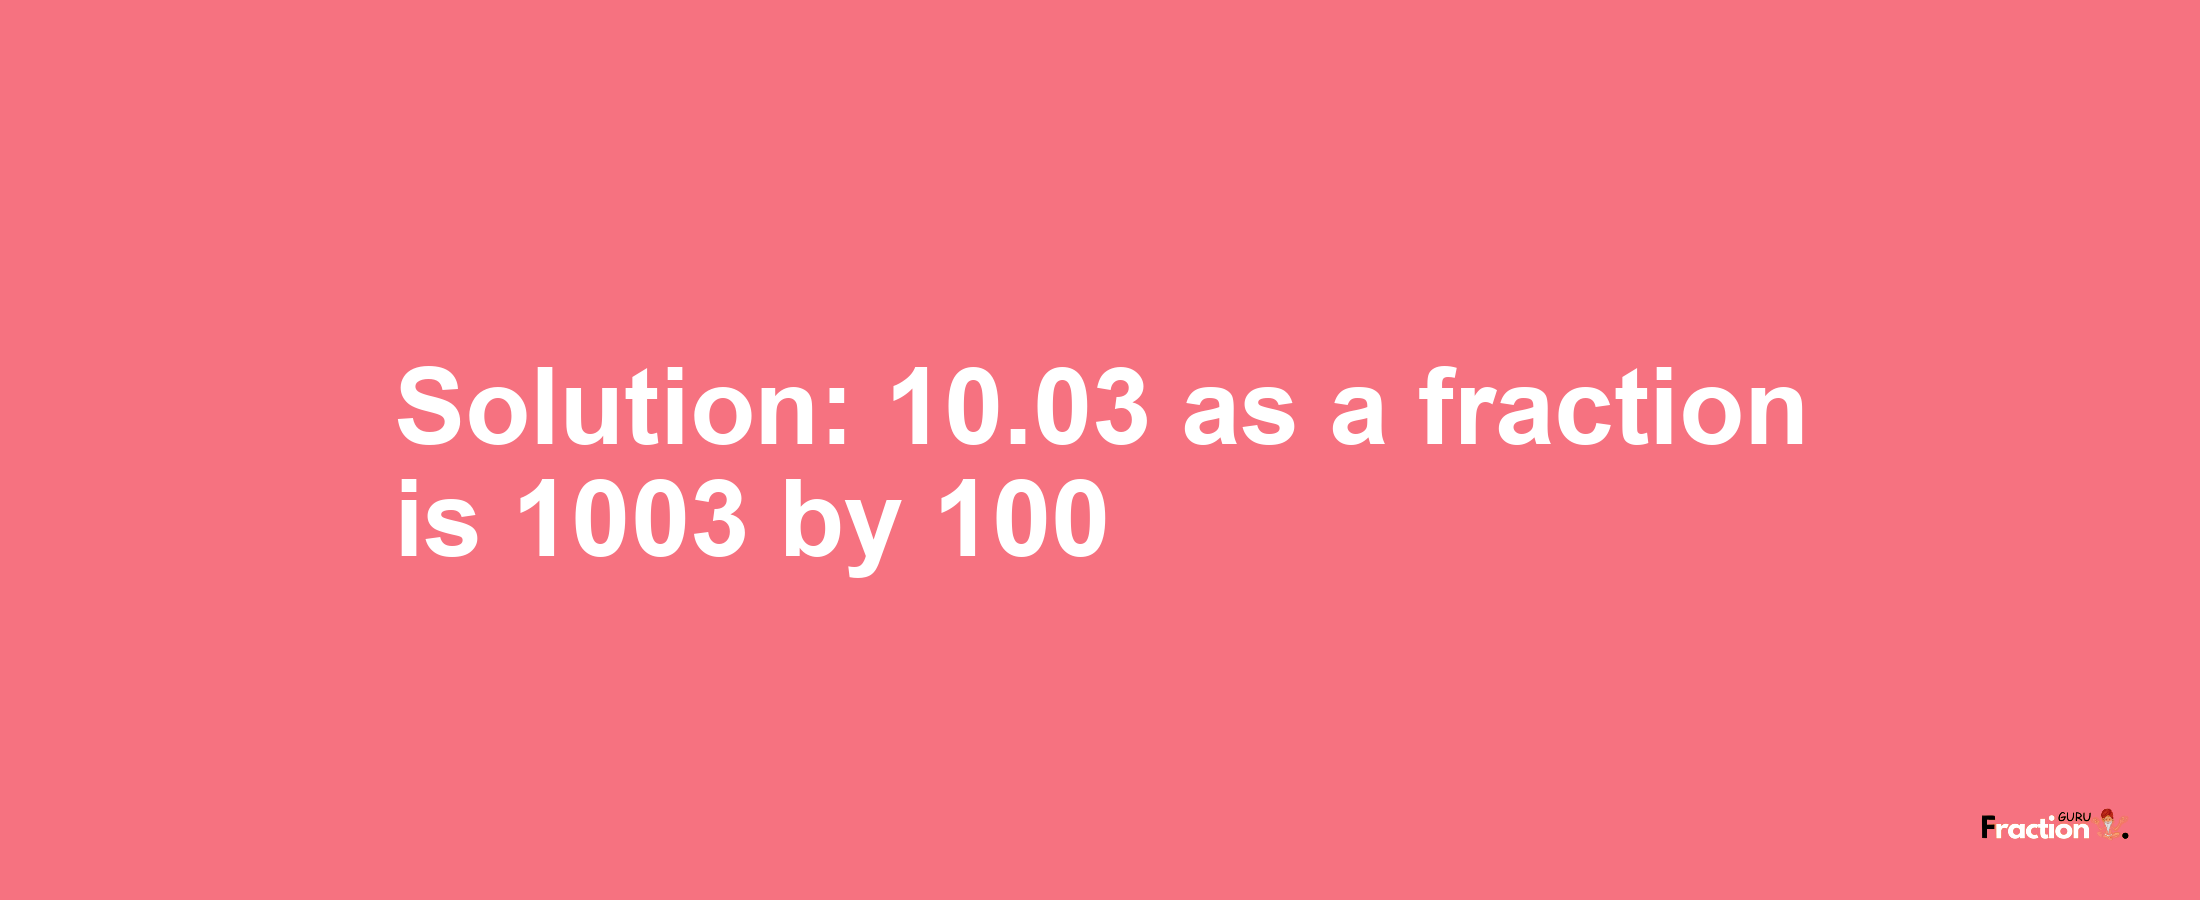 Solution:10.03 as a fraction is 1003/100